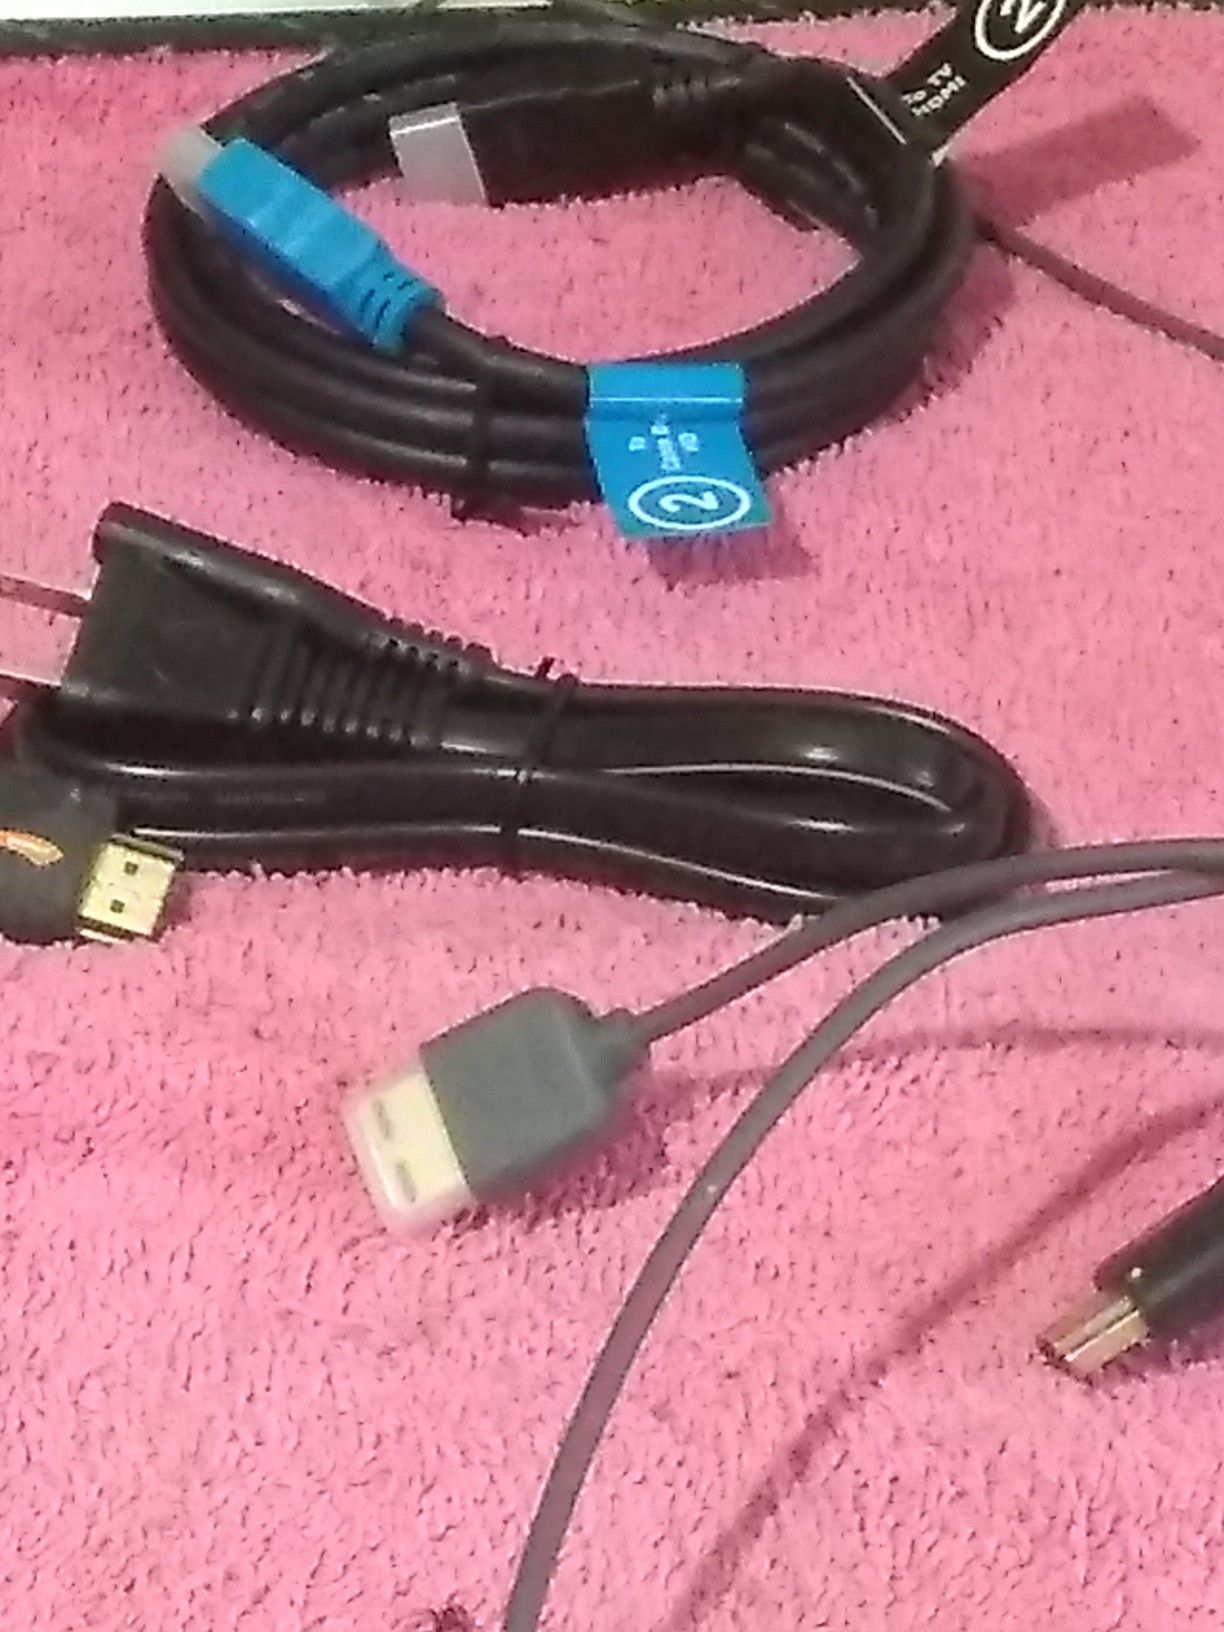 HDMI cords and power cord